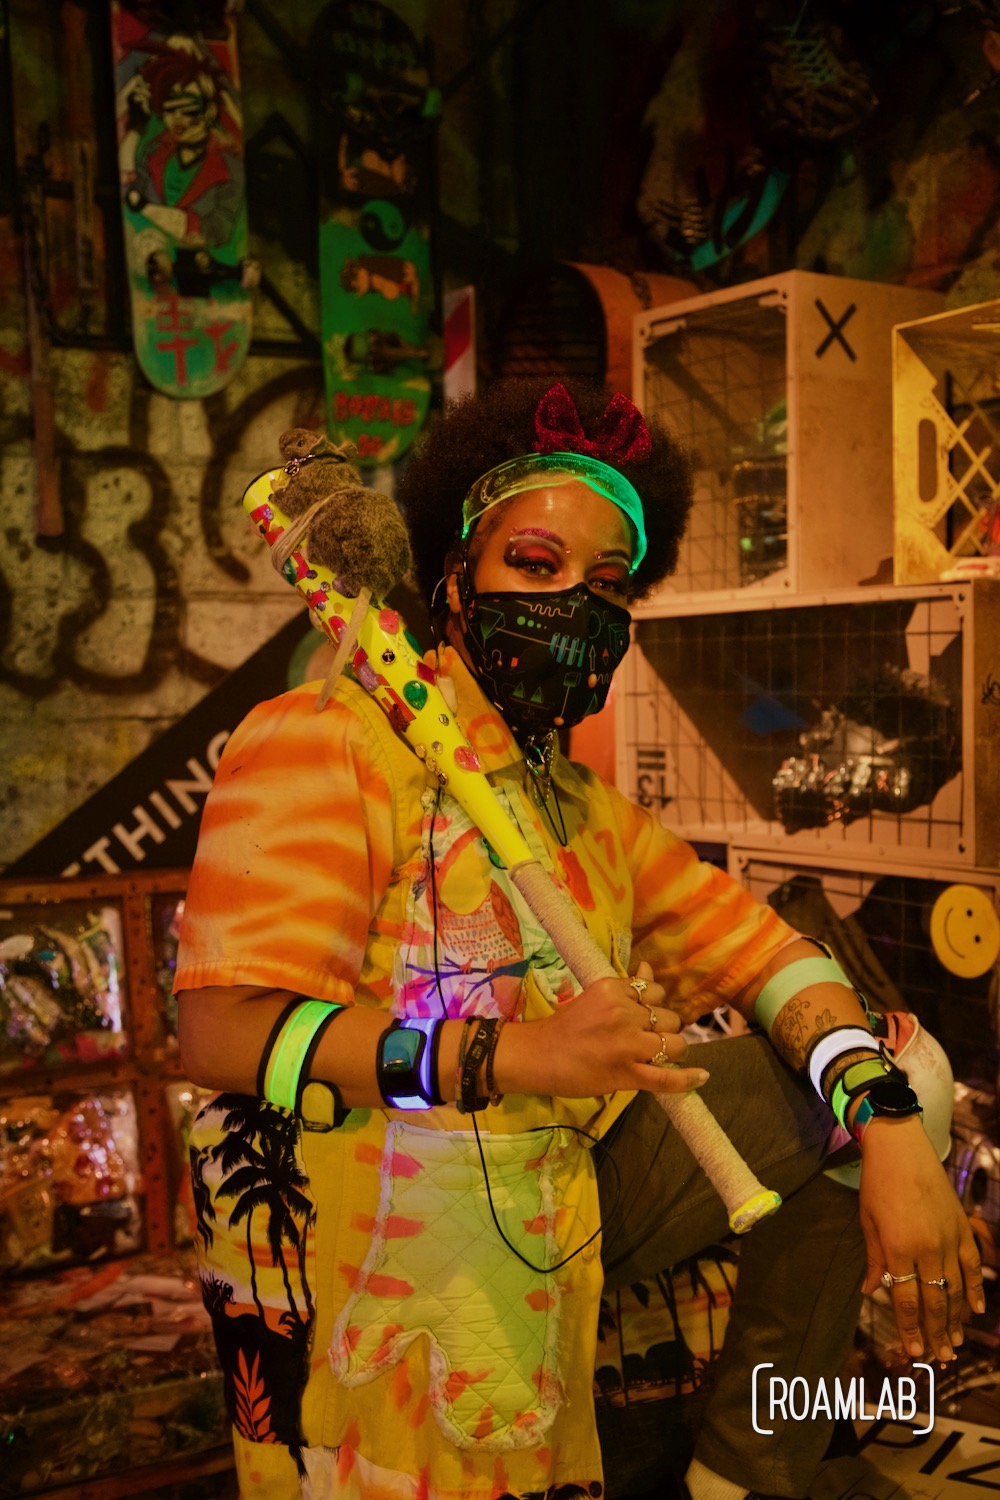 Woman dressed in neon cyberpunk inspired gear, one of the many Convergence Station "locals" here to lend a hand to visitors of the Meow Wolf Denver, Colorado location.